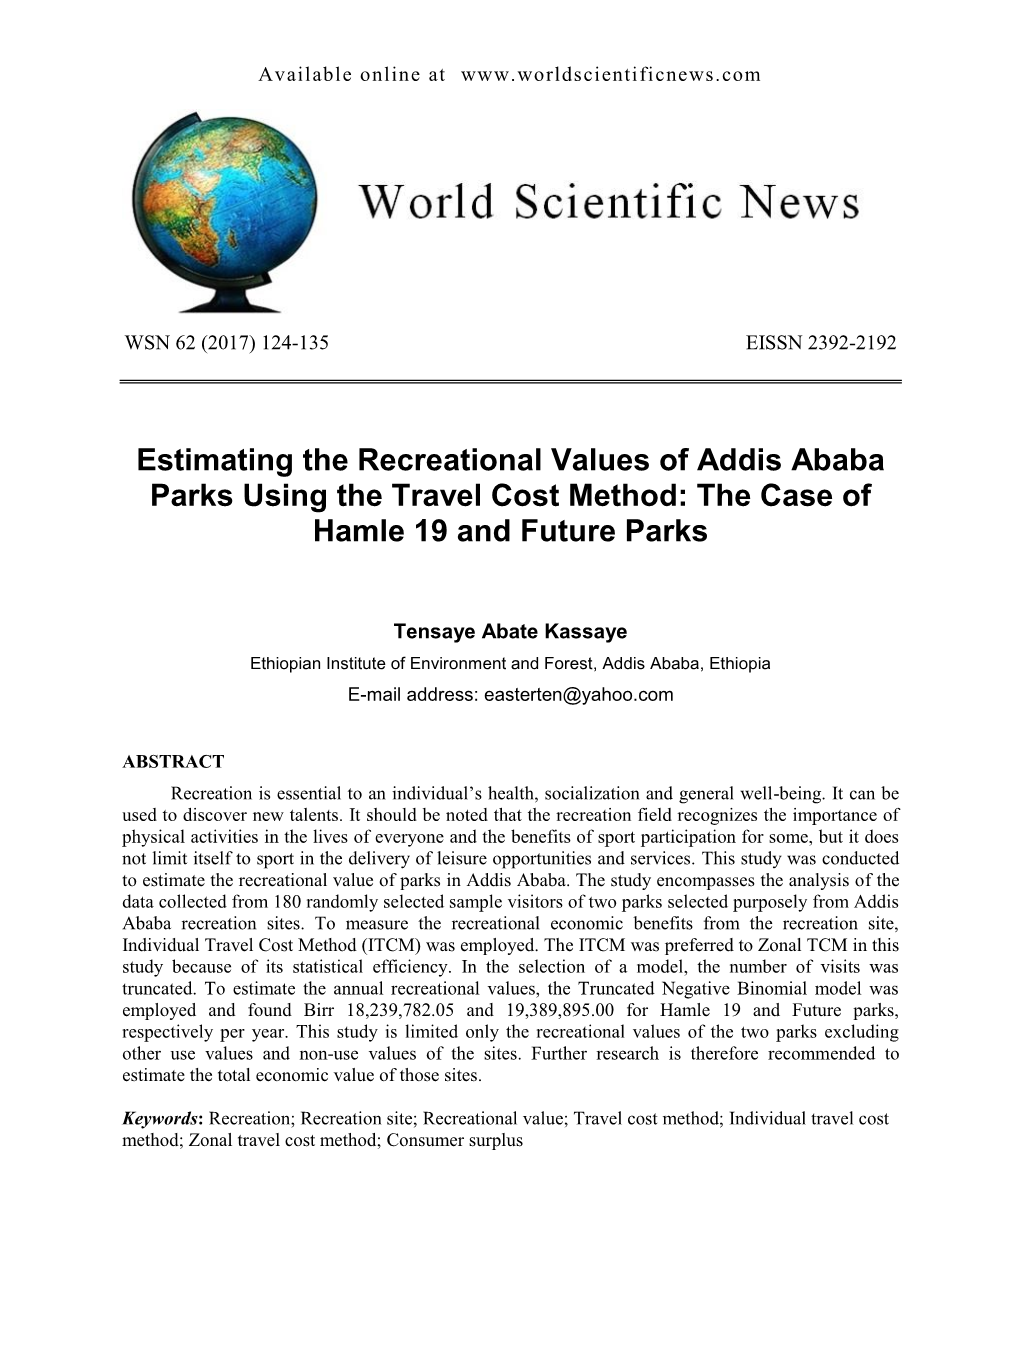 Estimating the Recreational Values of Addis Ababa Parks Using the Travel Cost Method: the Case of Hamle 19 and Future Parks